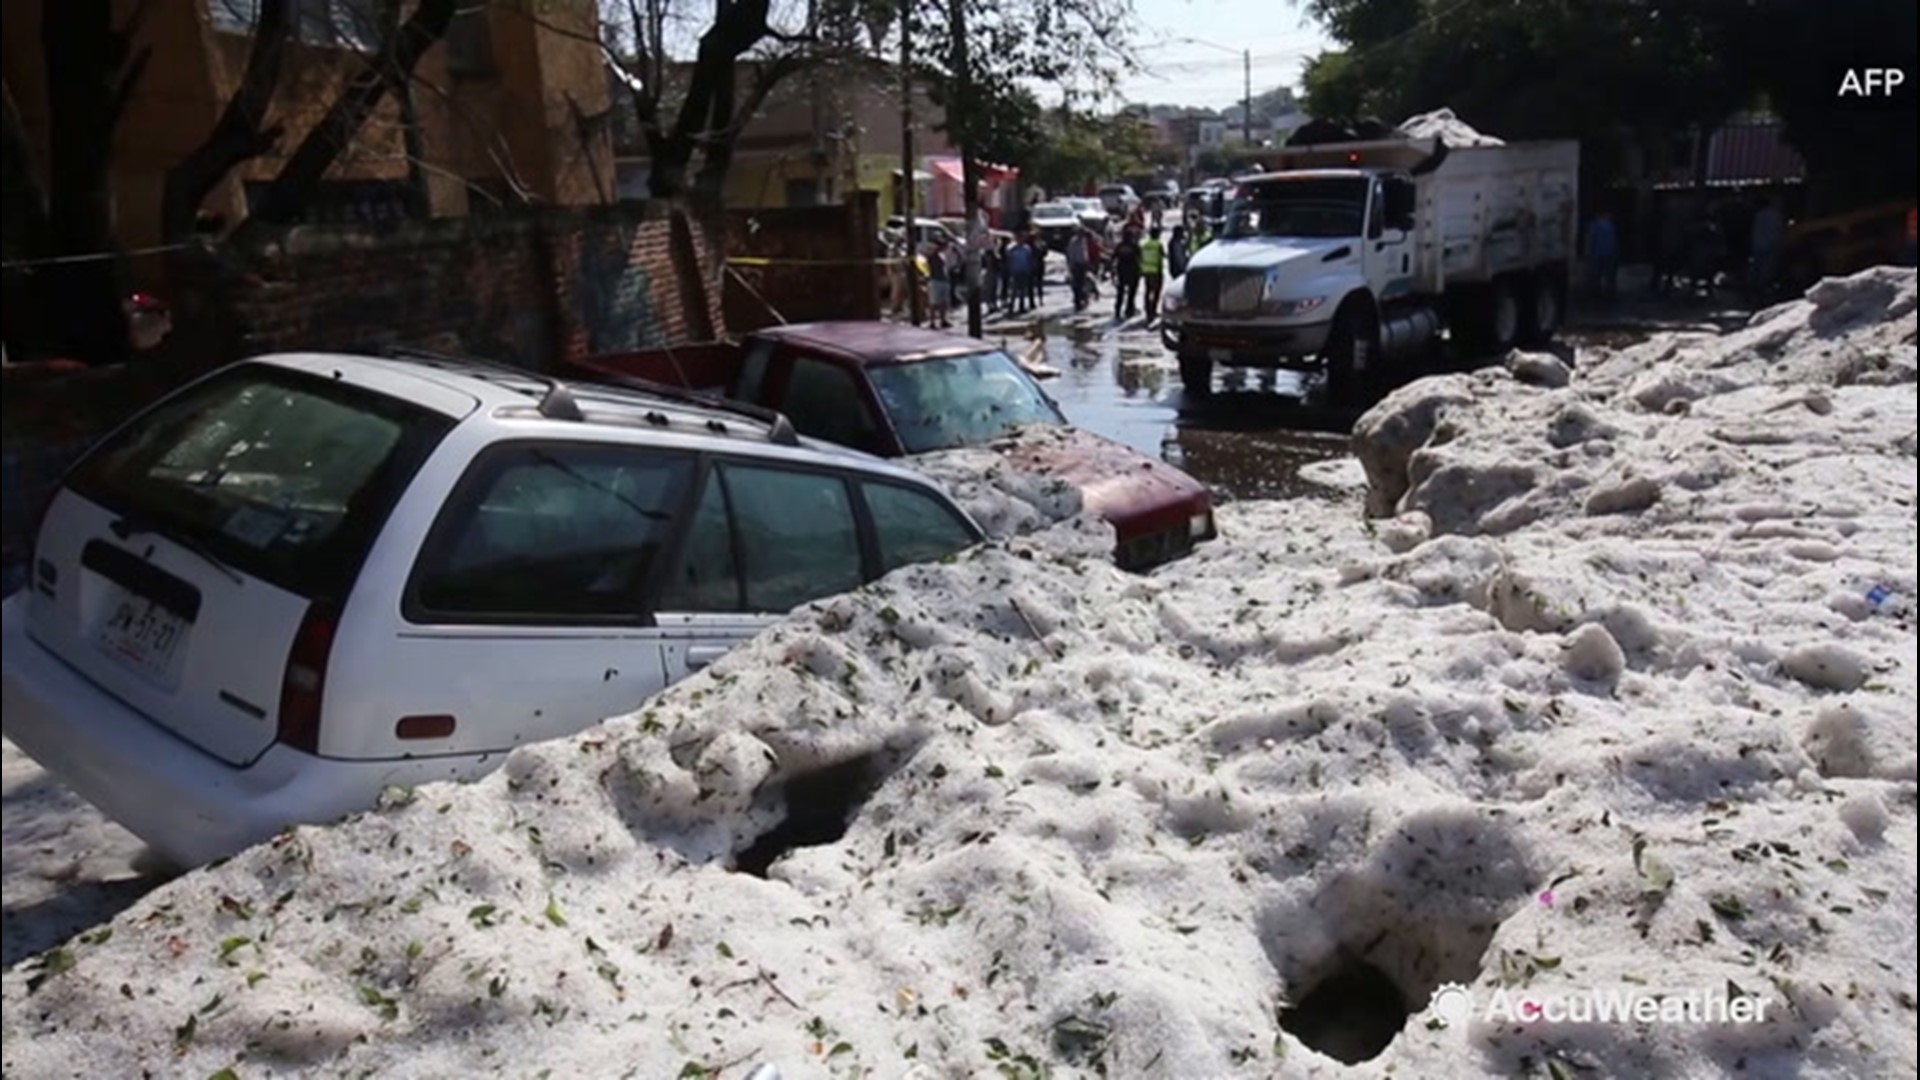 Cars were trapped  in Guadalajara, Mexico, on June 30, after a storm dropped extreme amounts of hail on the area.